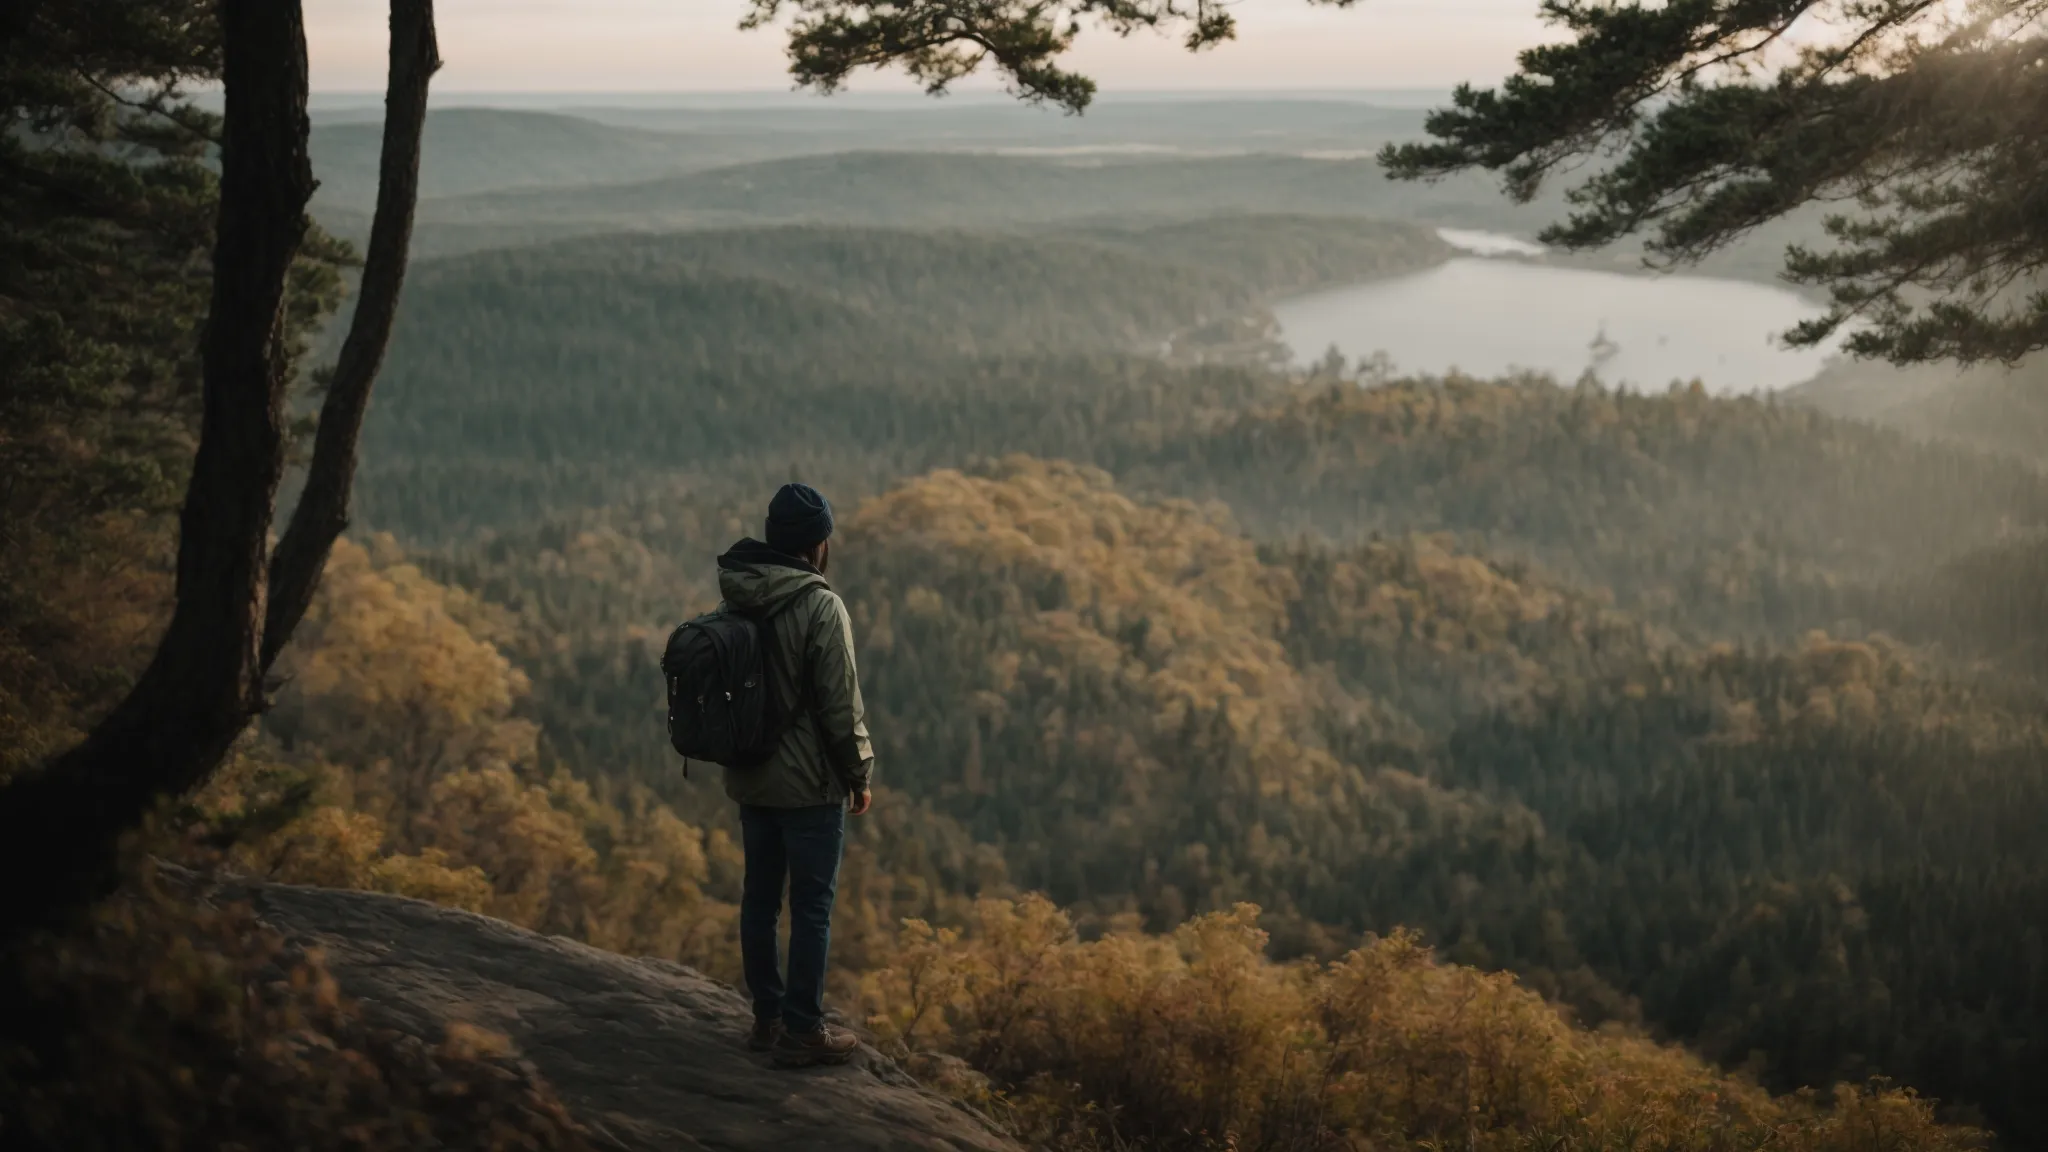 a person stands at a cliff's edge, overlooking a vast forest, capturing the scene with a smartphone.